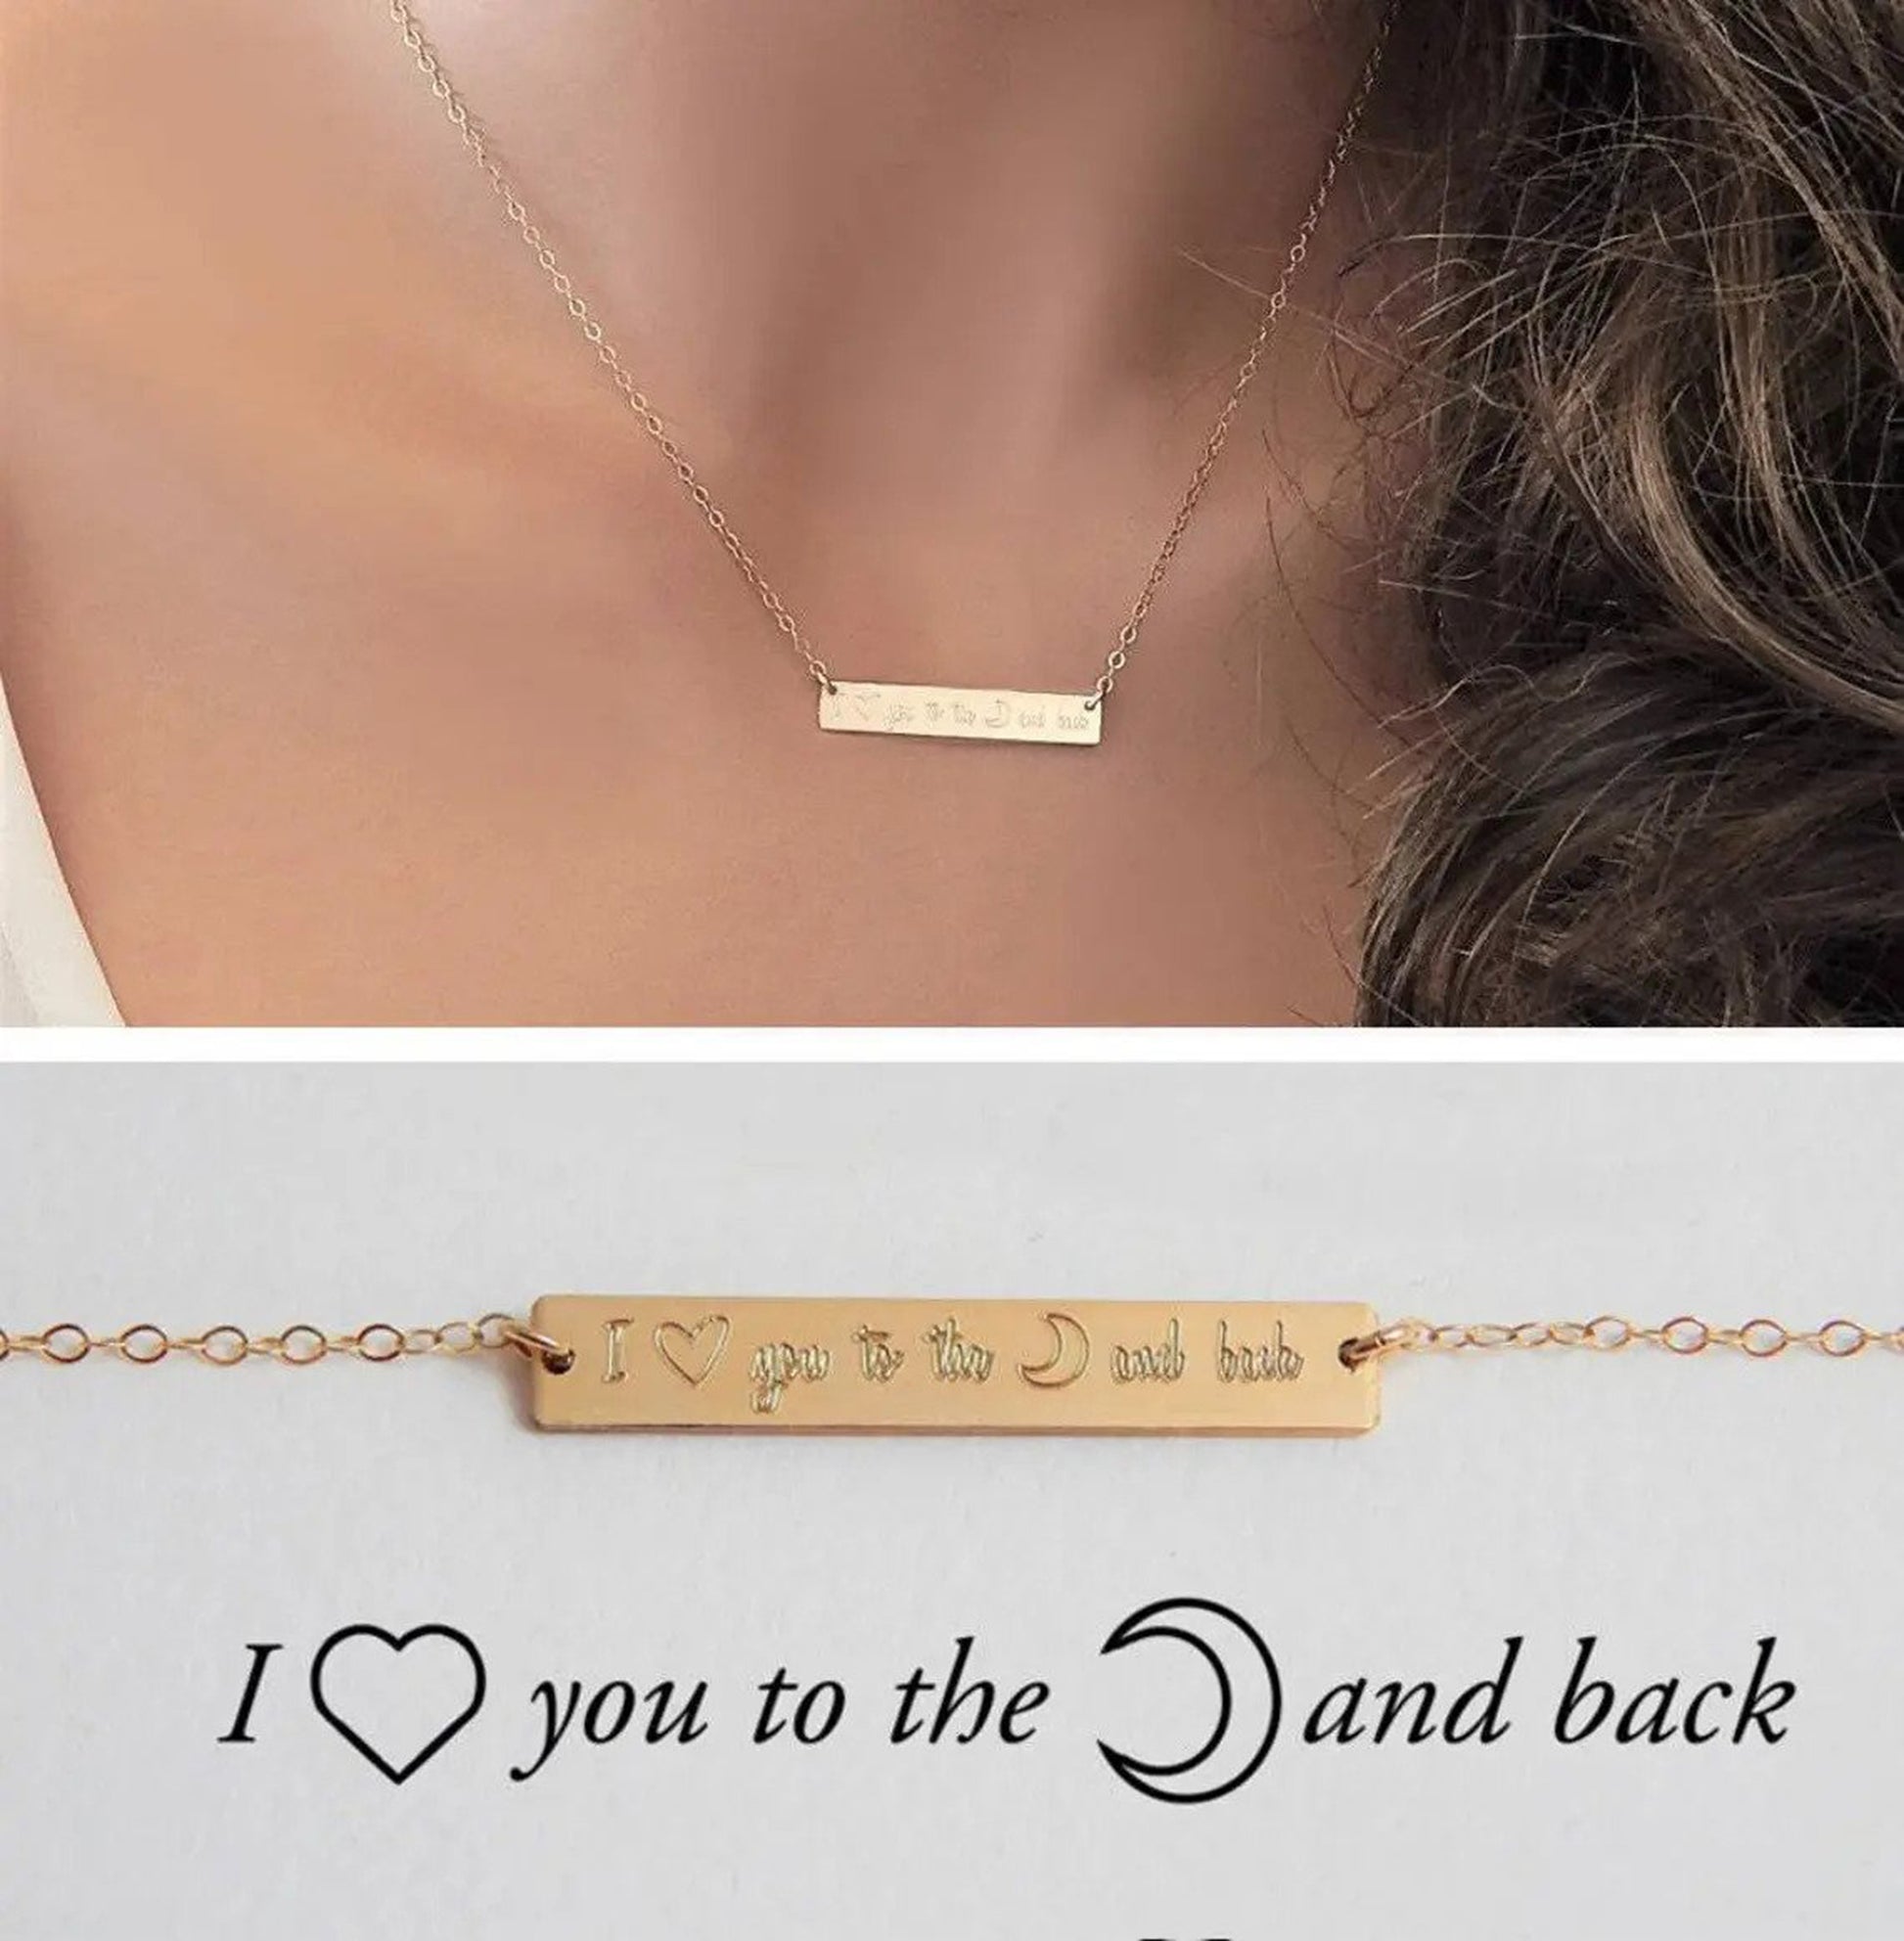 Gold filled necklace bar jewelry with engraved message etched on surface hanging from a brunette model's neck, with a split screen view of a close up of the engraved surface with a custom message.